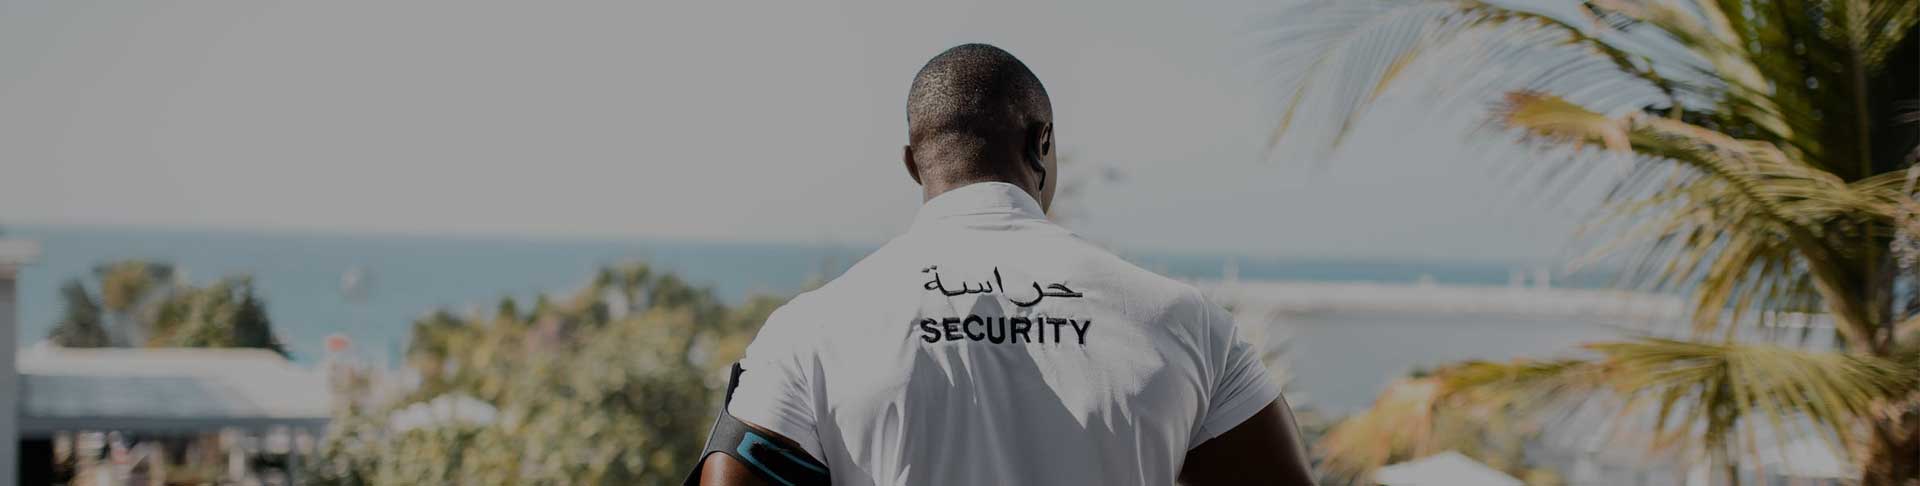 Bouncer Company In Dubai | Bouncers For Hire In Dubai | Bouncer Security Agency UAE